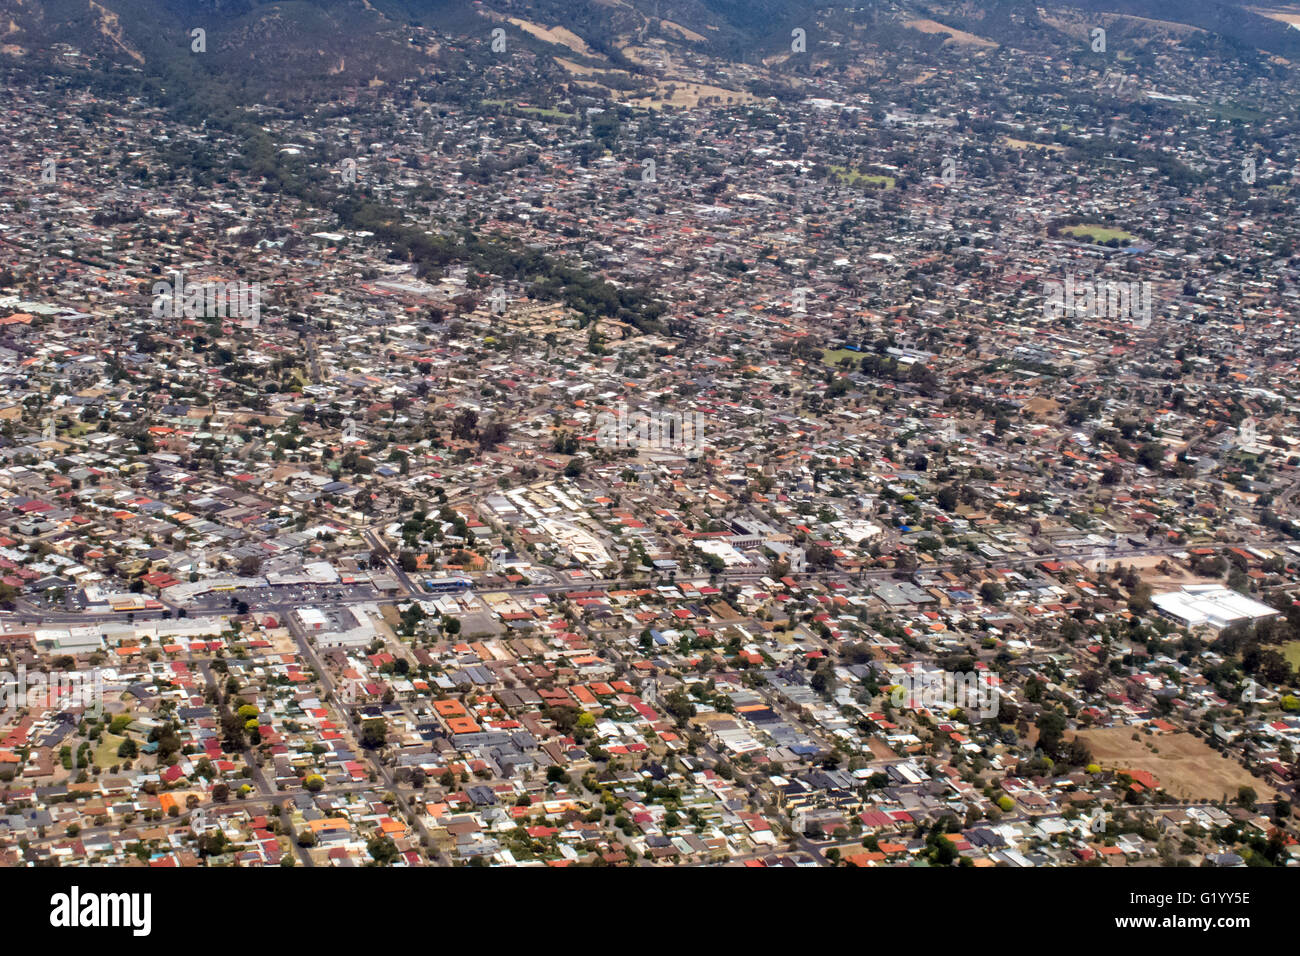 The North Eastern suburbs of the city of Adelaide in Australia as seen from the air. Stock Photo